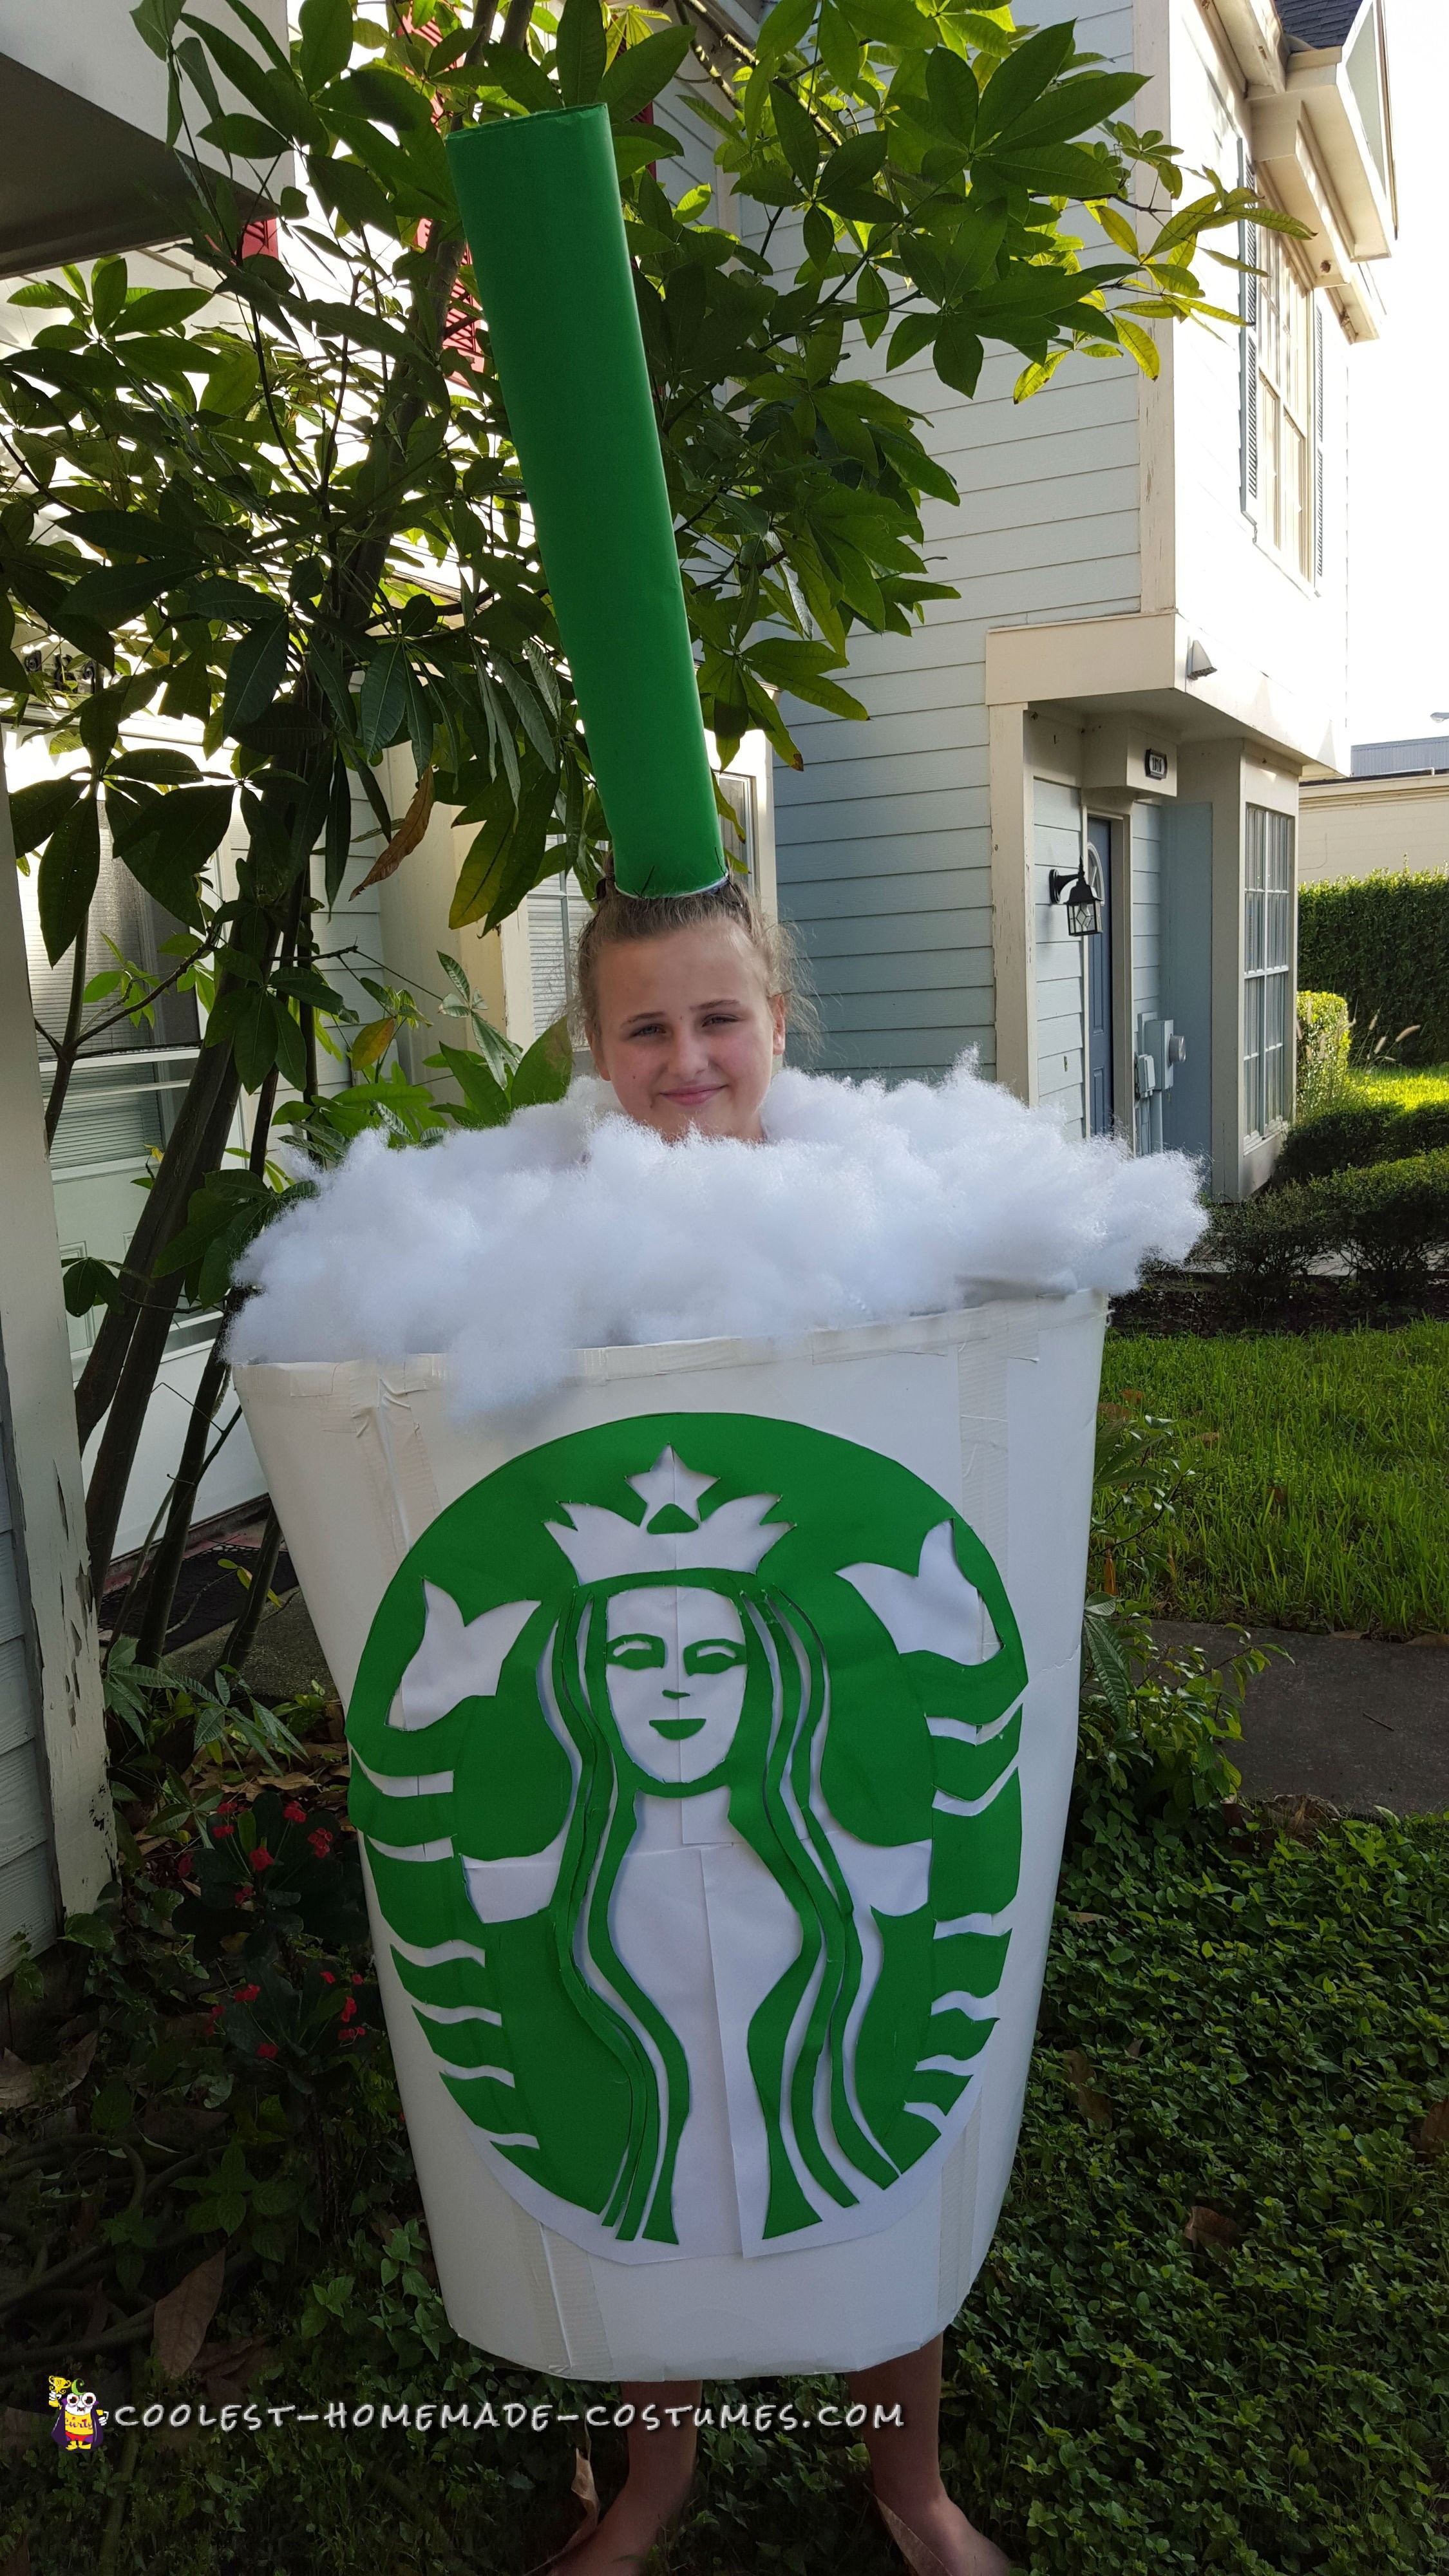 https://www.coolest-homemade-costumes.com/files/2015/11/coolest-starbucks-giant-cup-1st-place-costume-148989.jpg